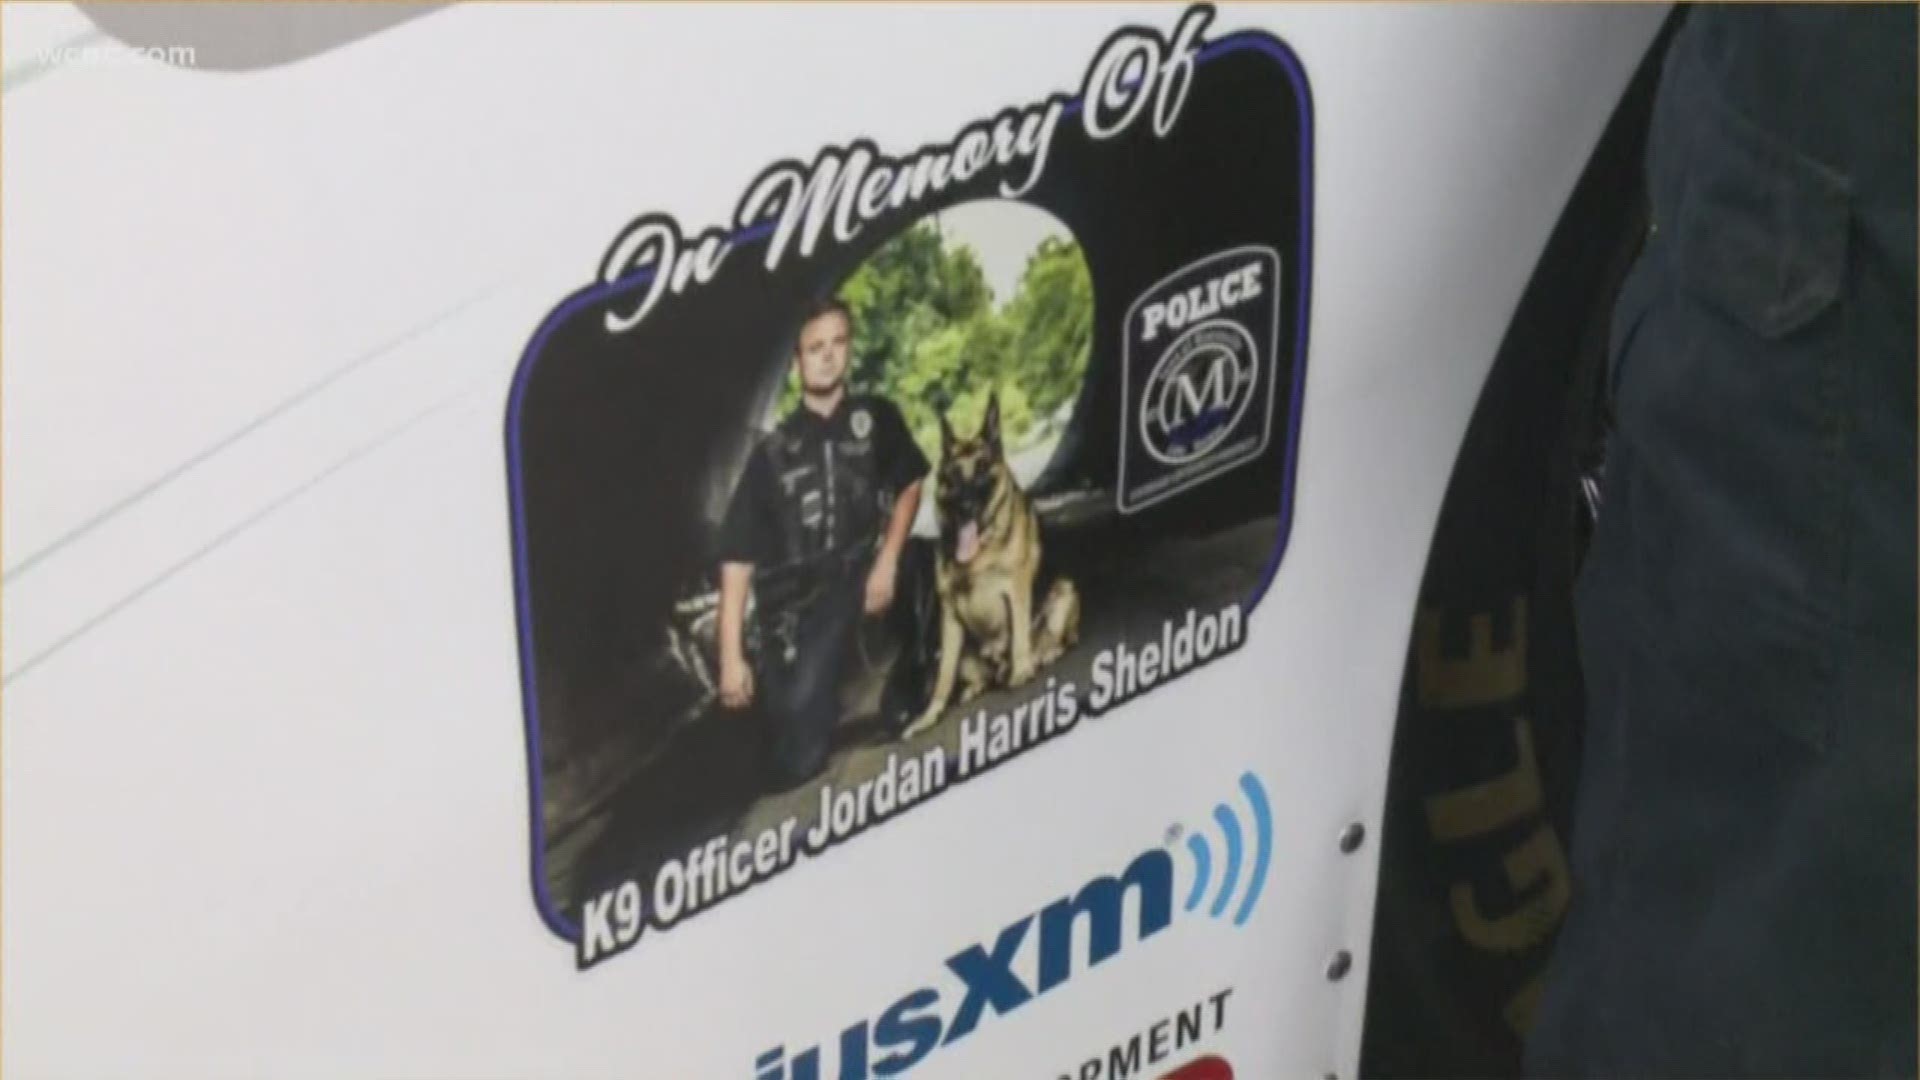 The NASCAR community is rallying around fallen Mooresville Police Officer Jordan Sheldon, who was killed in the line of duty earlier this month.